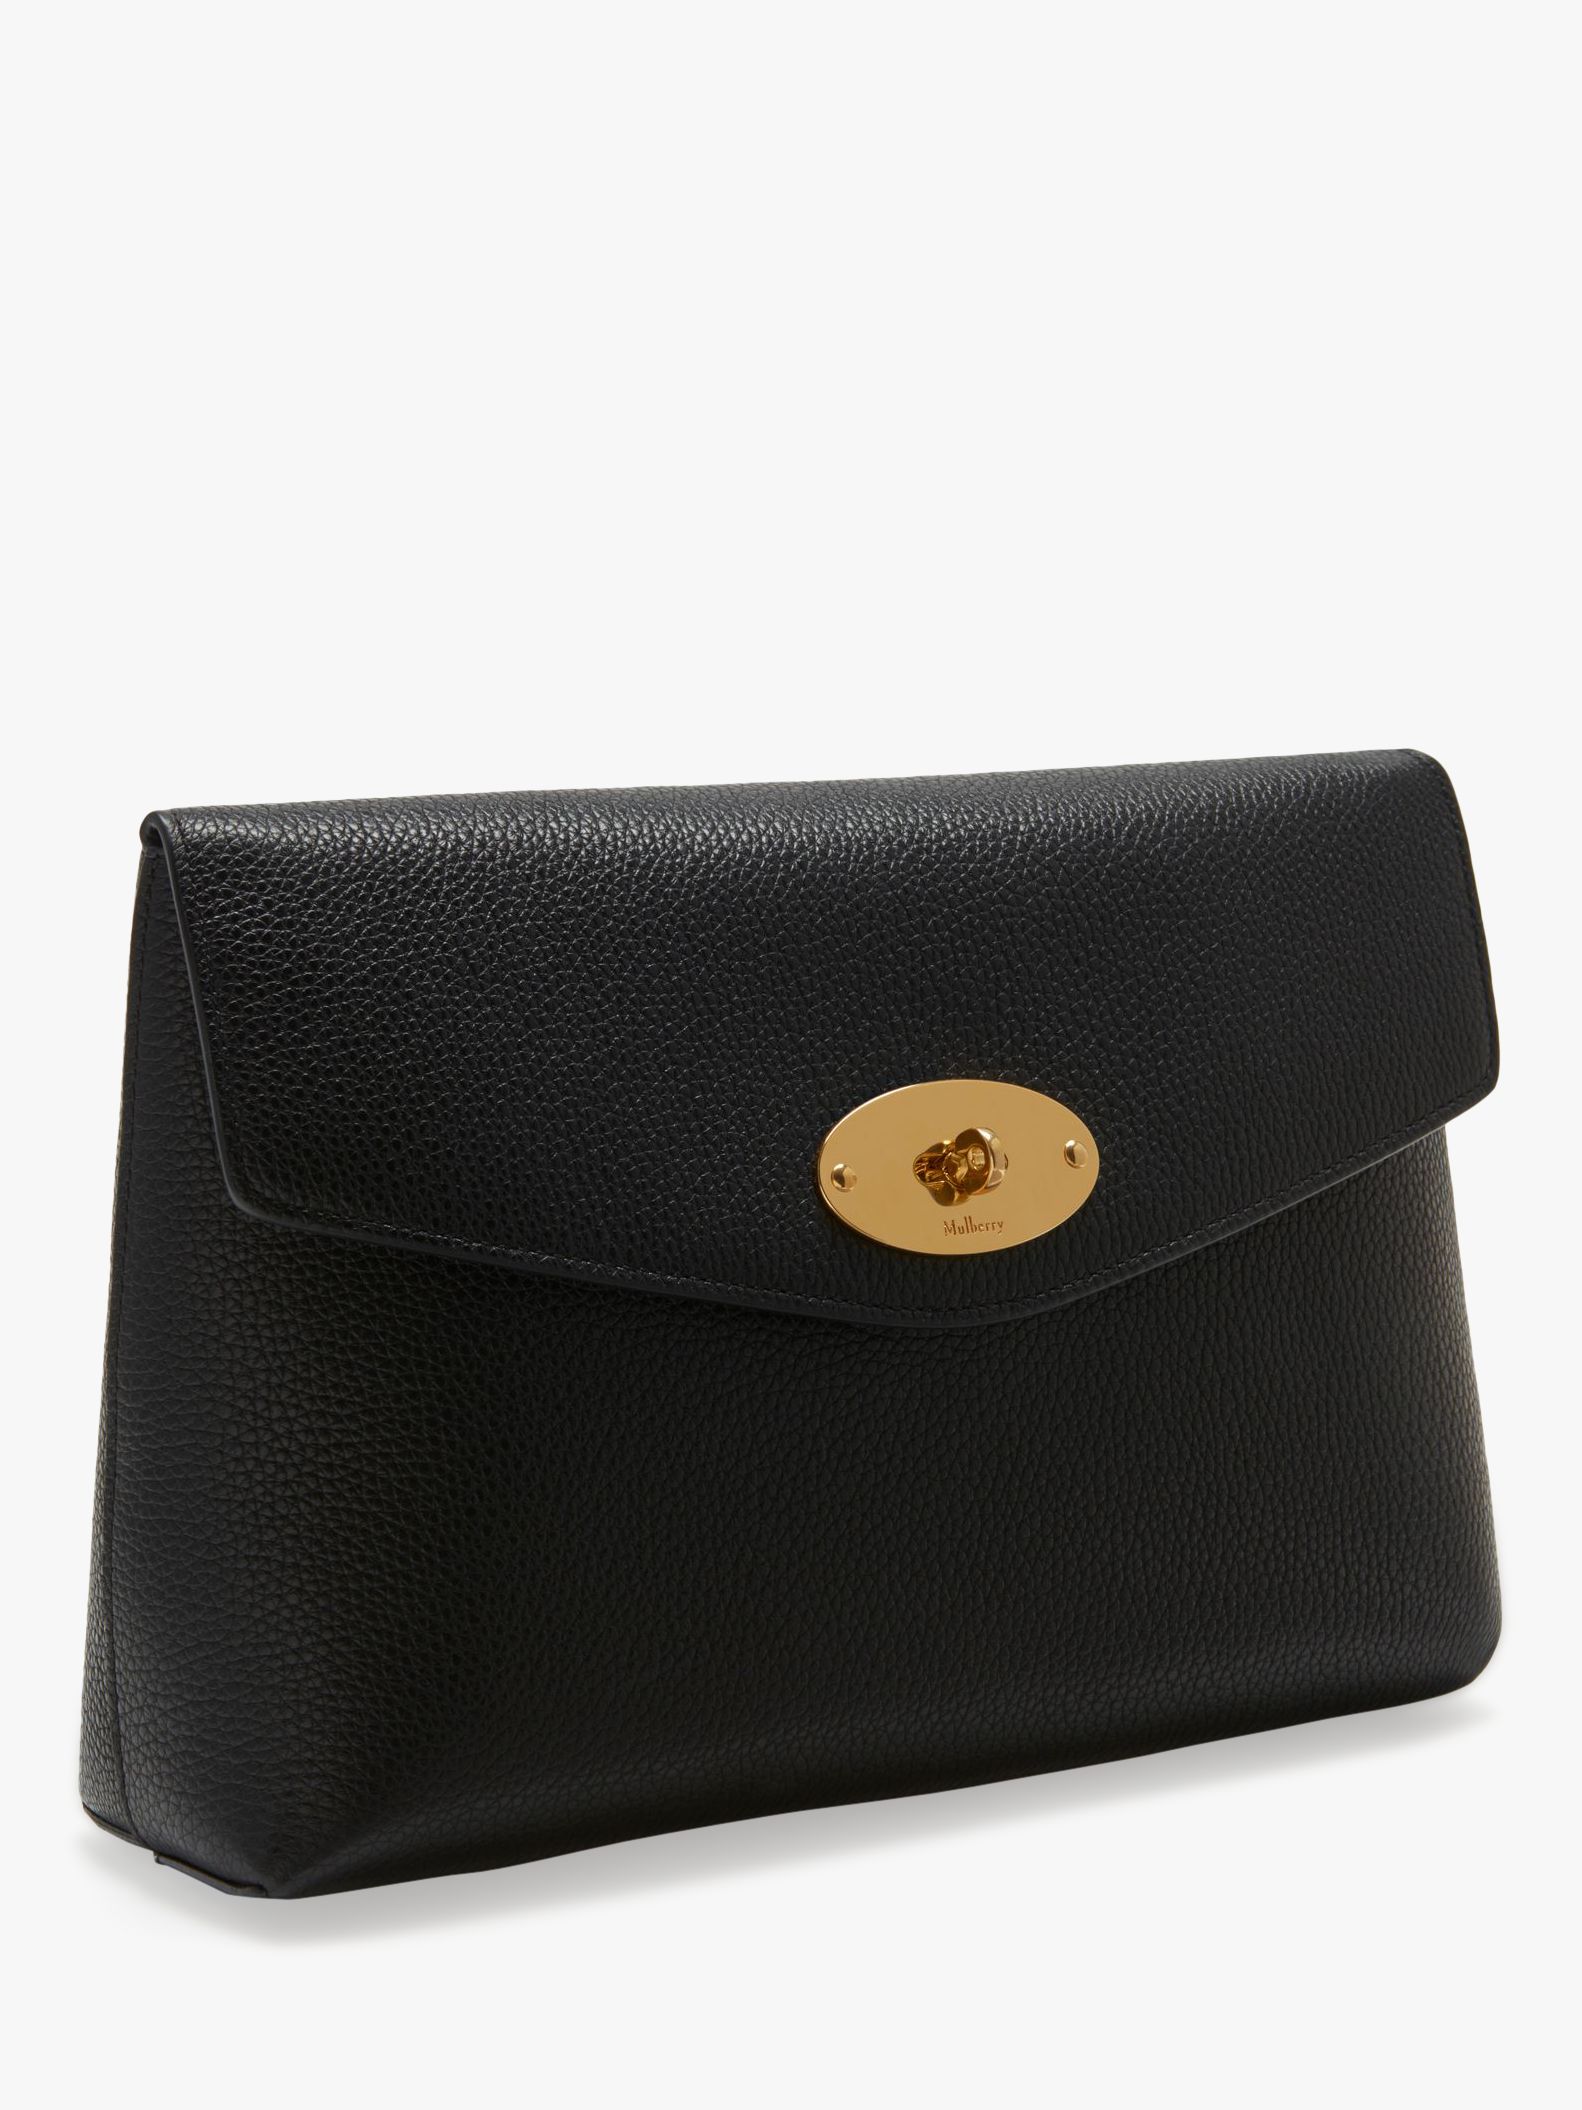 Mulberry Darley Classic Grain Leather Large Cosmetic Pouch at John ...